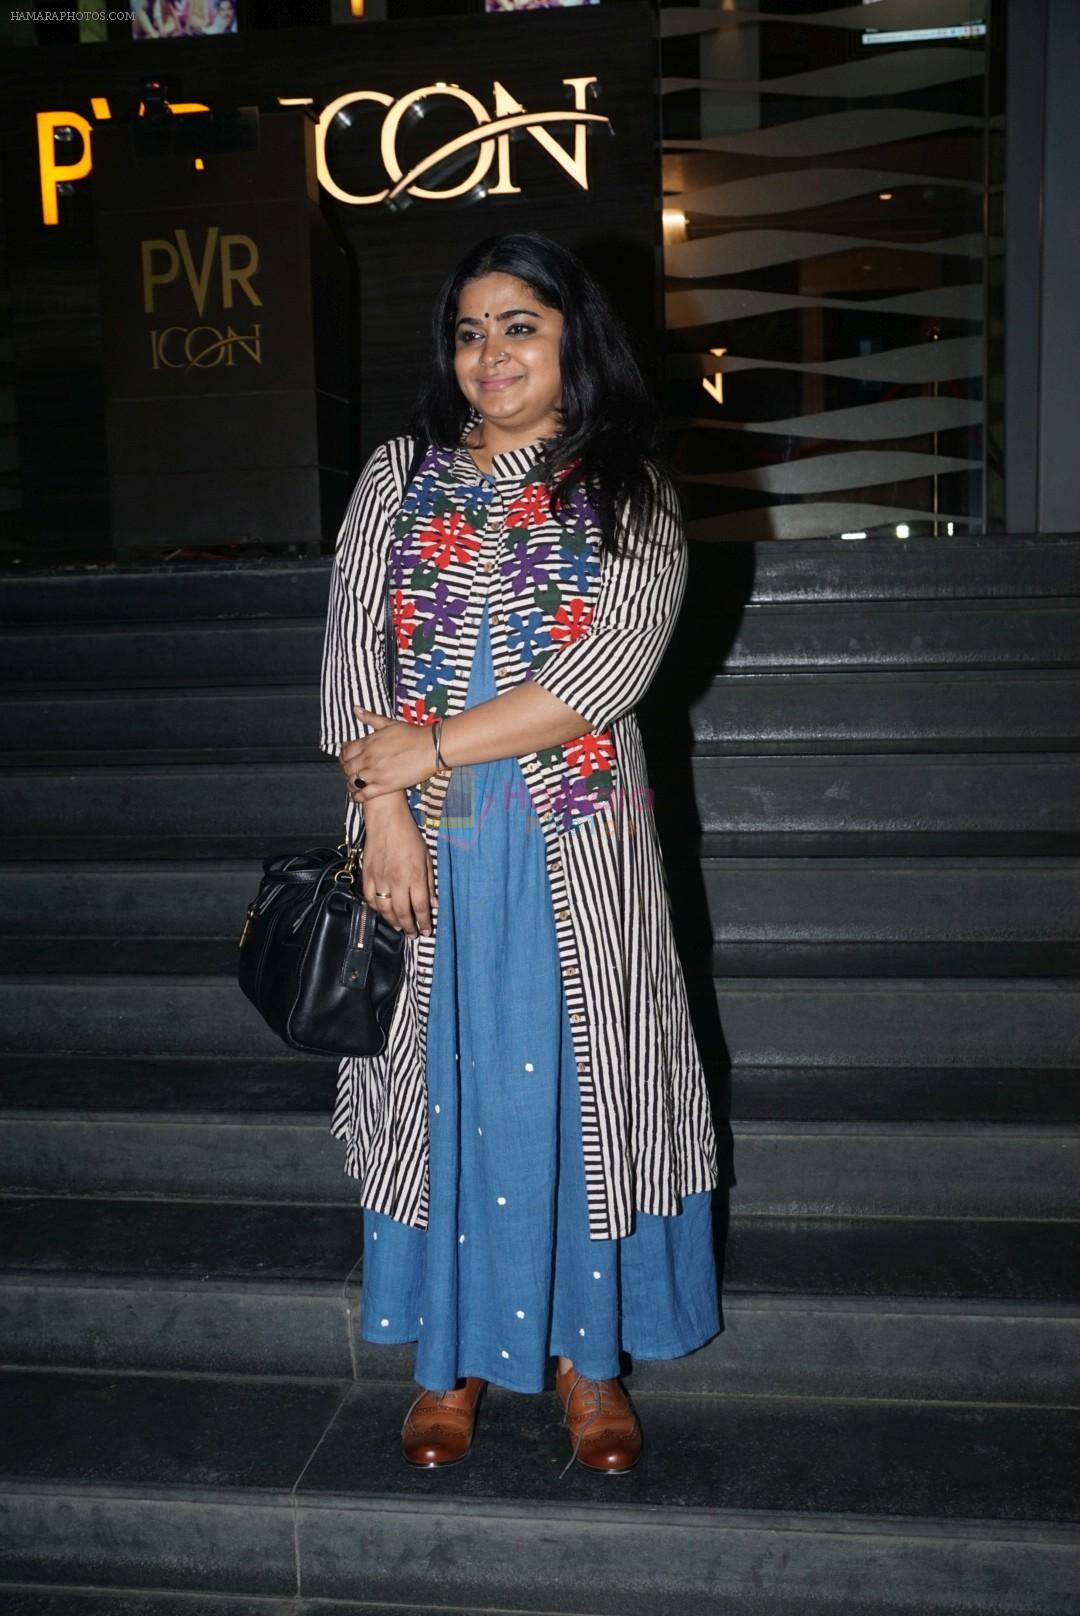 Ashwiny Iyer Tiwari at the screening of veere di wedding in pvr icon on 30th May 2018